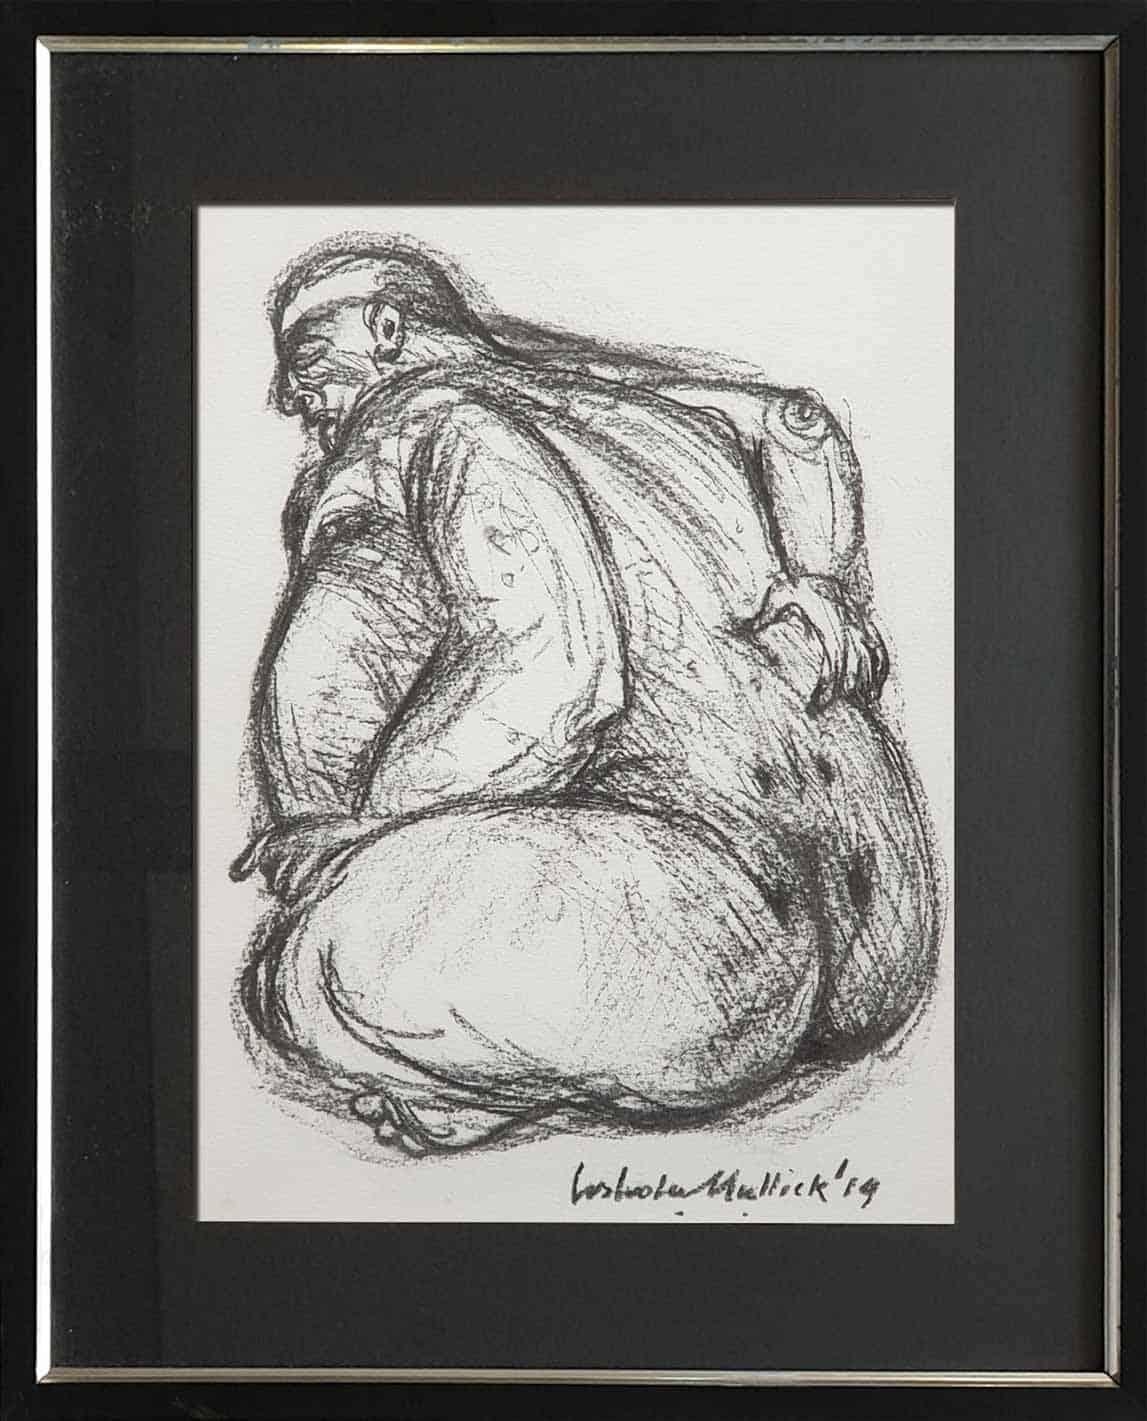 Figurative, Drawing, Charcoal on paper, Black, White by Indian Artist "In Stock"